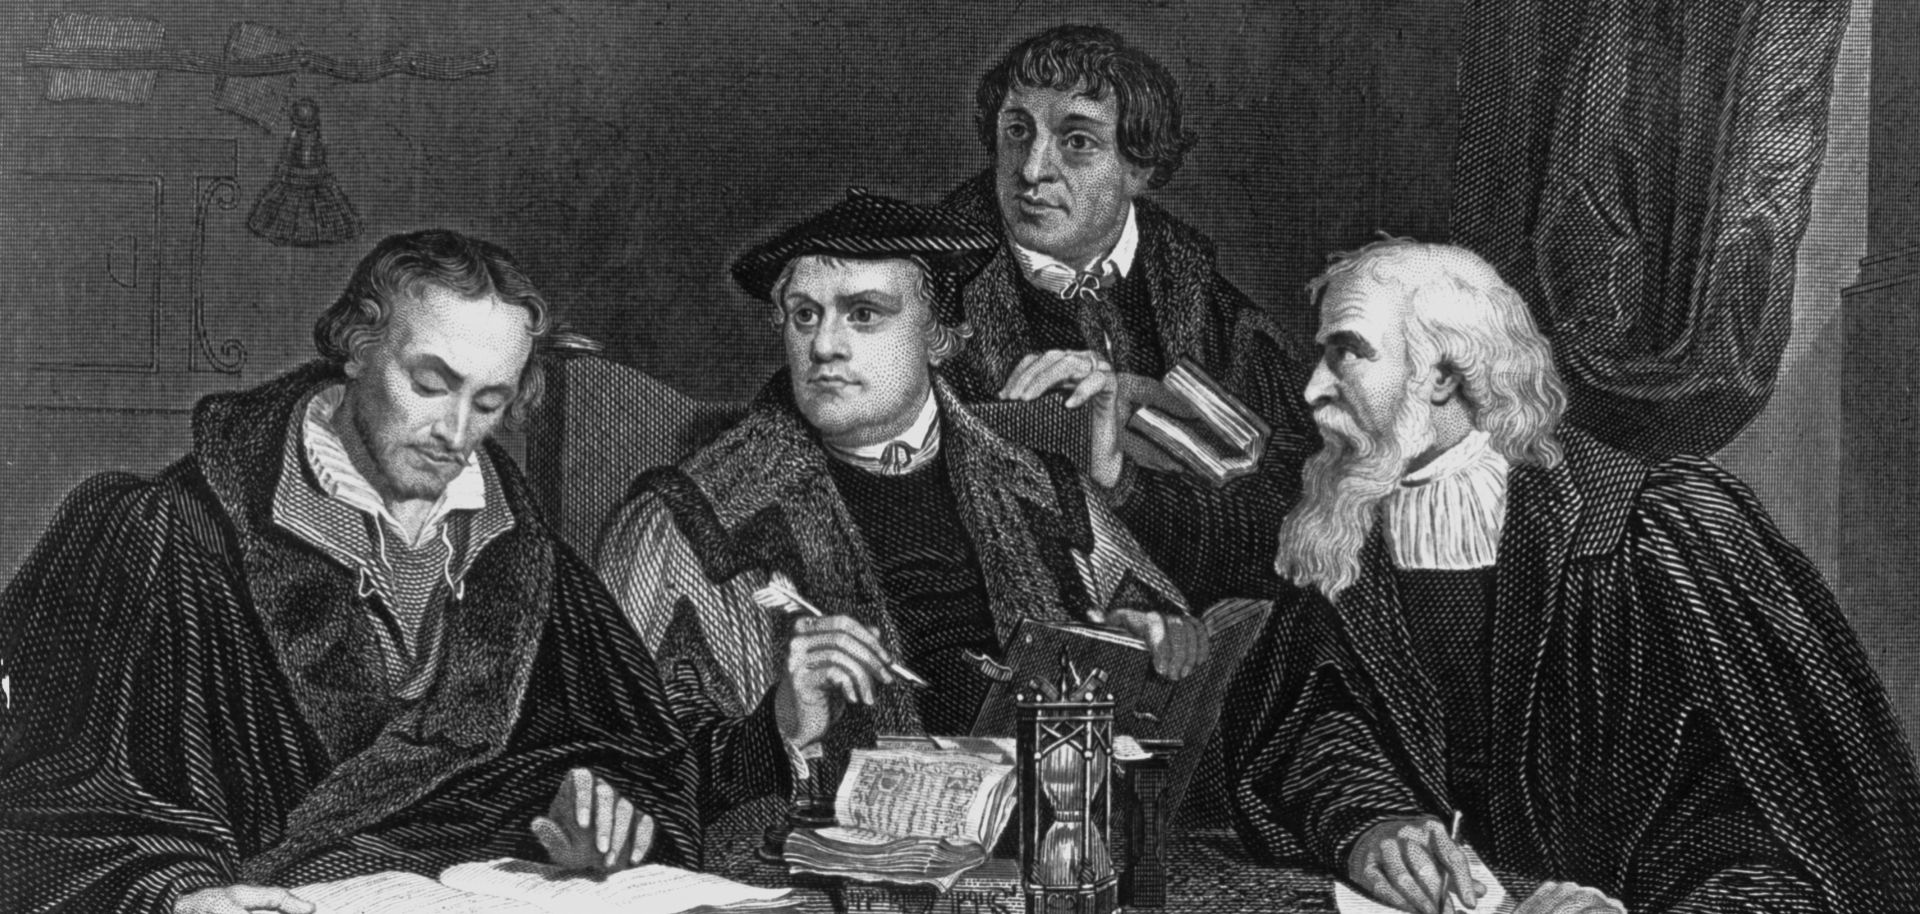 Around 1510, German theologian and reformer Martin Luther, second from the left, sits with his contemporaries.